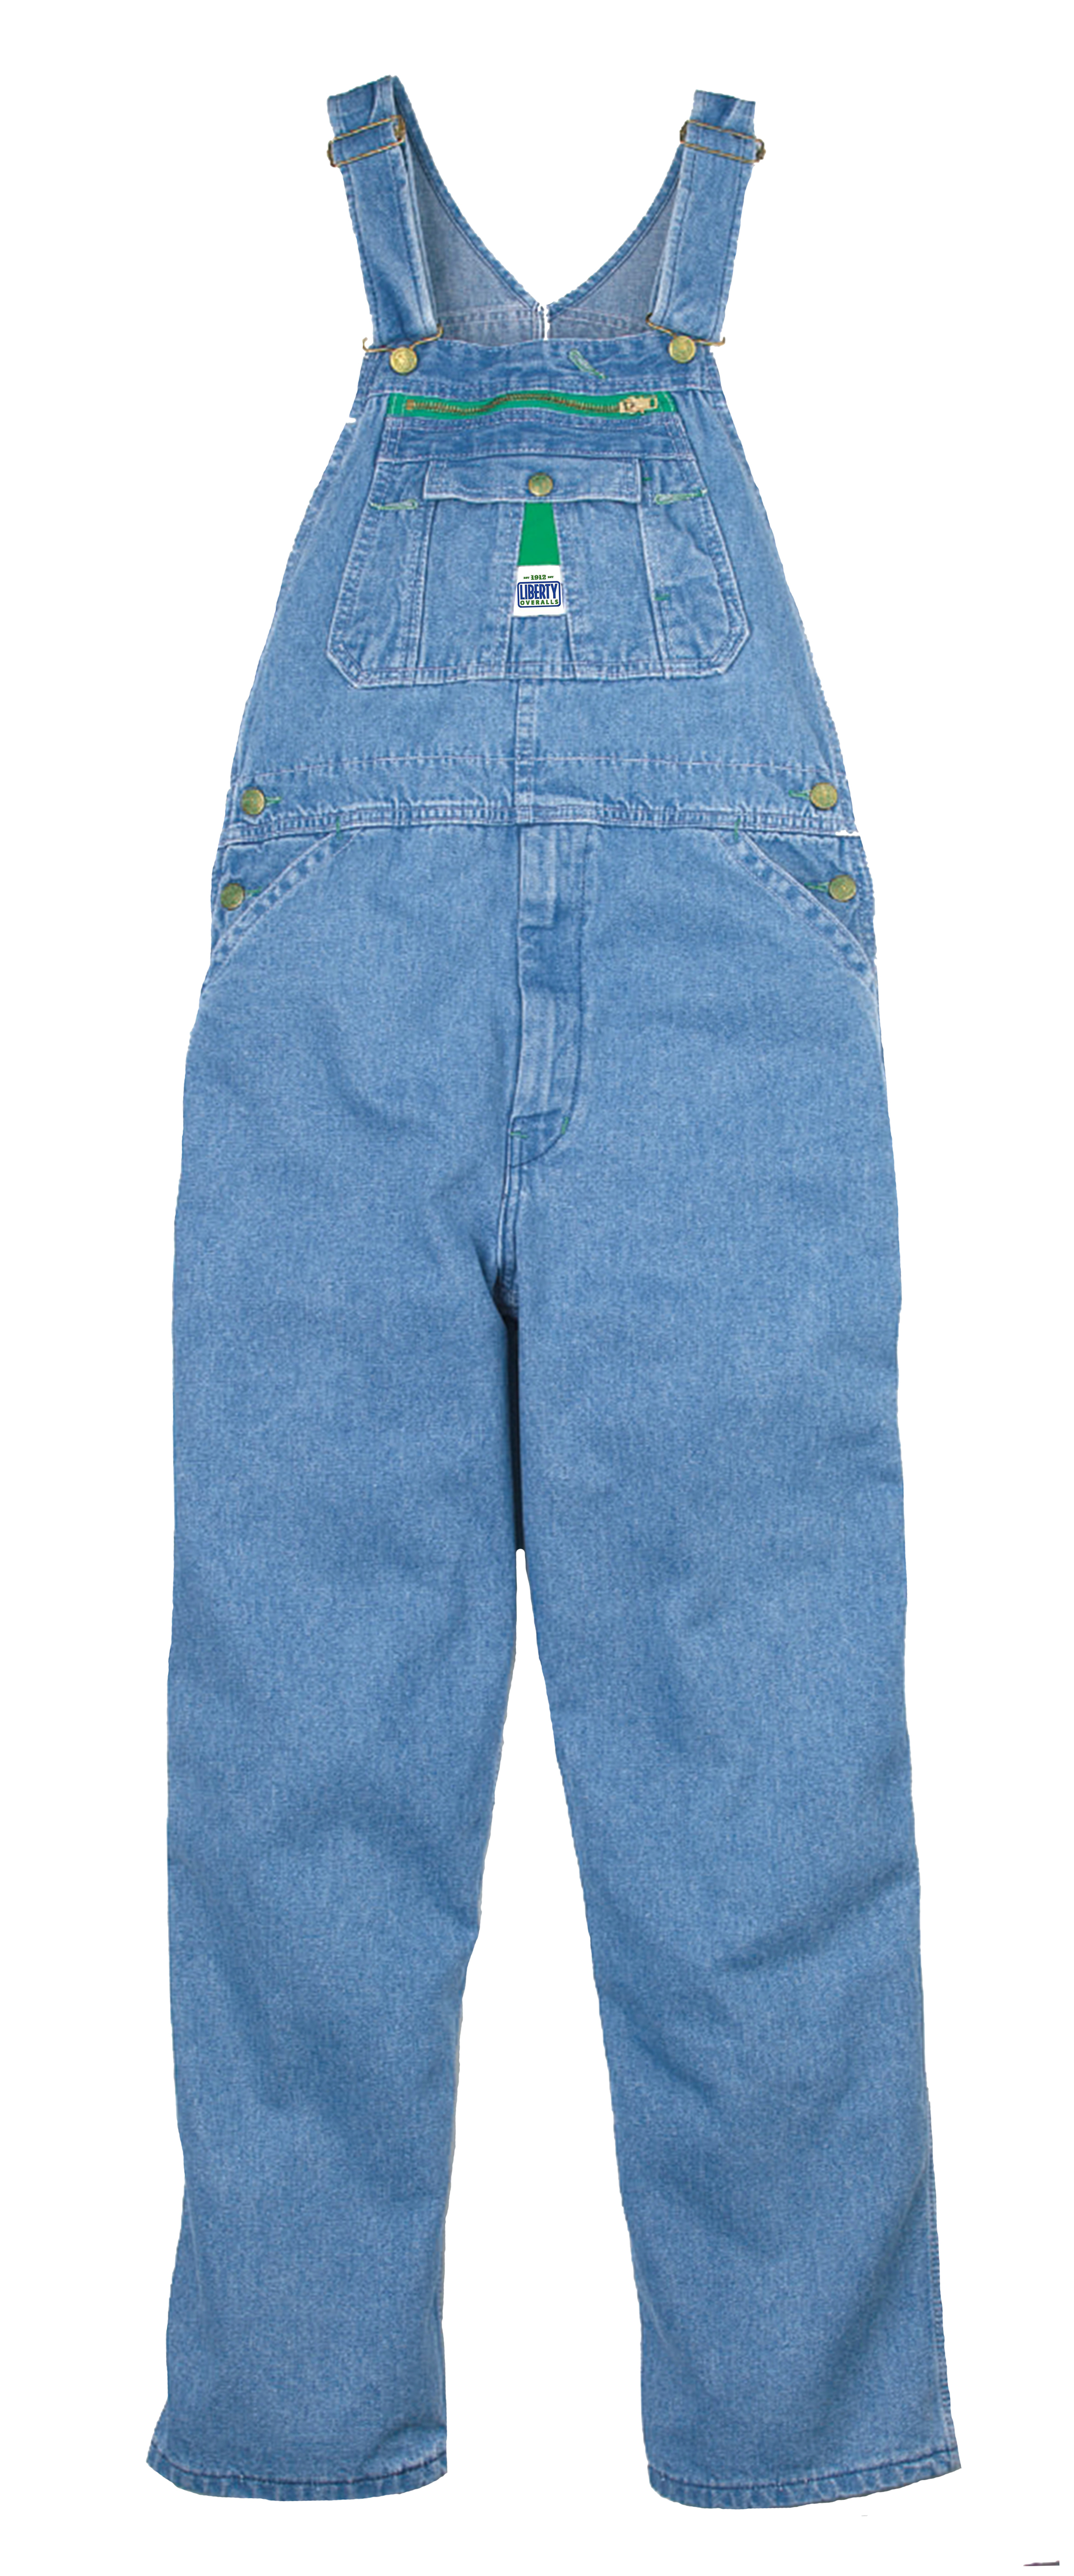 Clothing, Shoes & Accessories NWT Liberty Bib Overall Liberty Overall ...